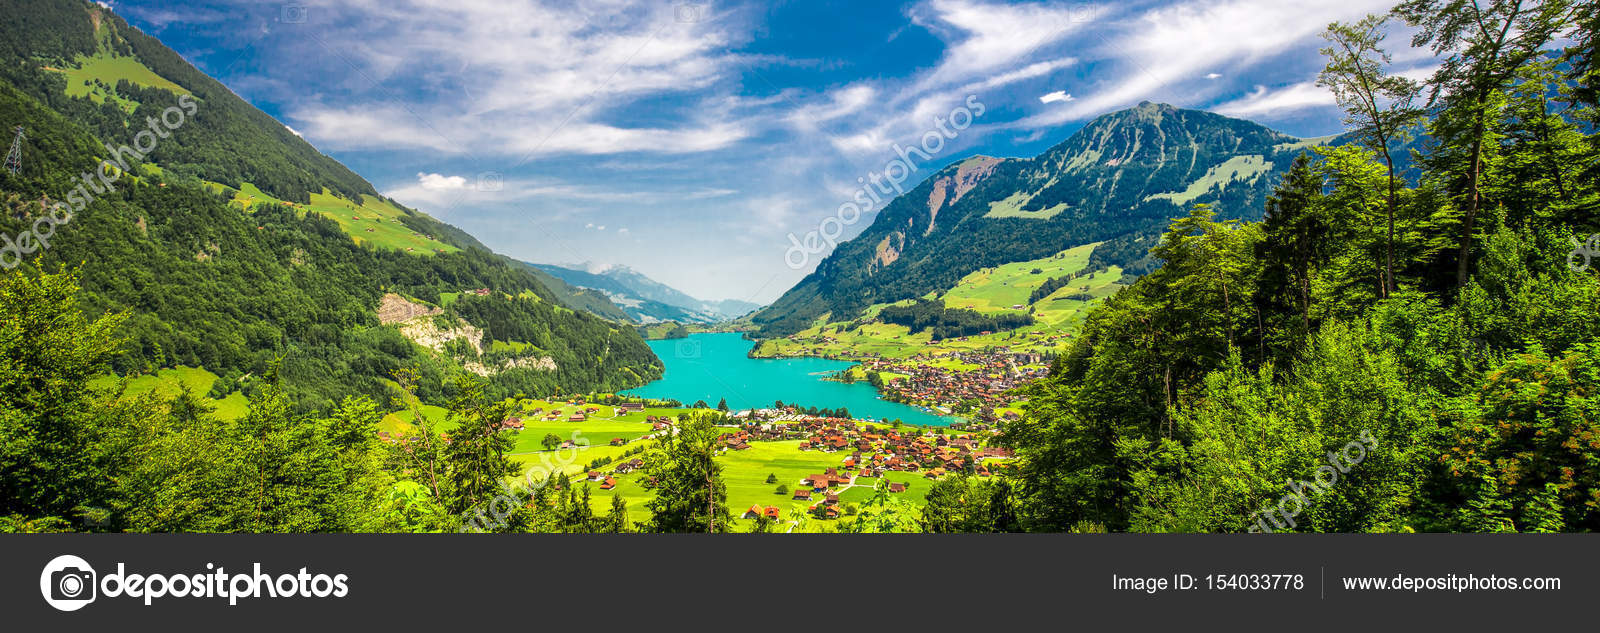 Lake Lungern with Swiss Alps Stock Photo by ©gevision 154033778